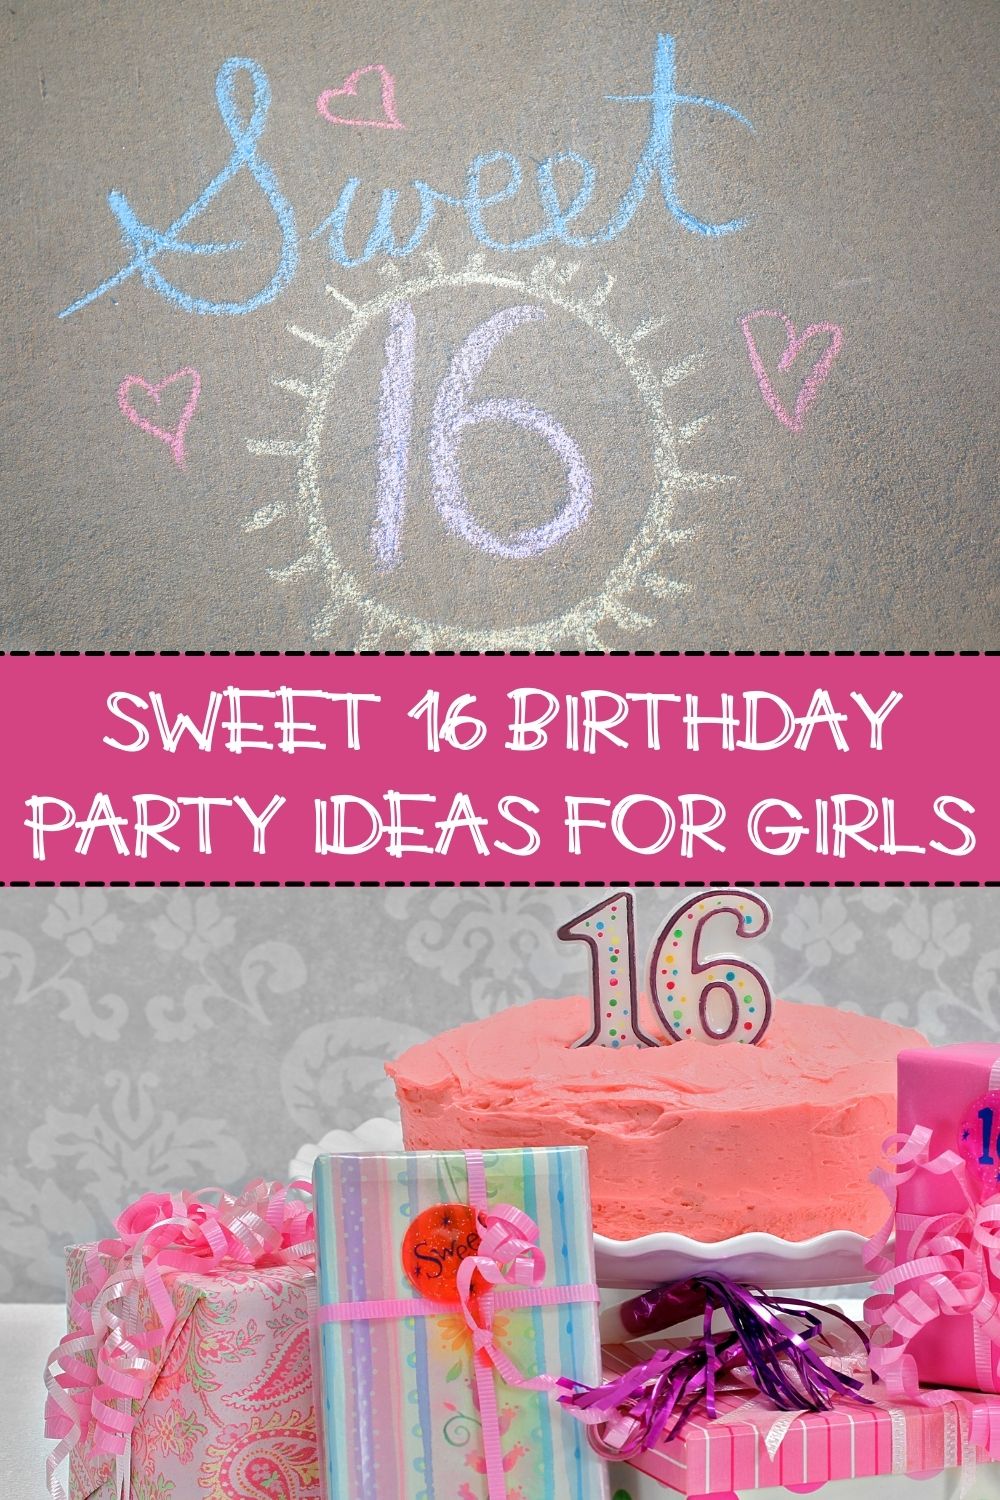 Sweet 16 birthday party ideas for girls